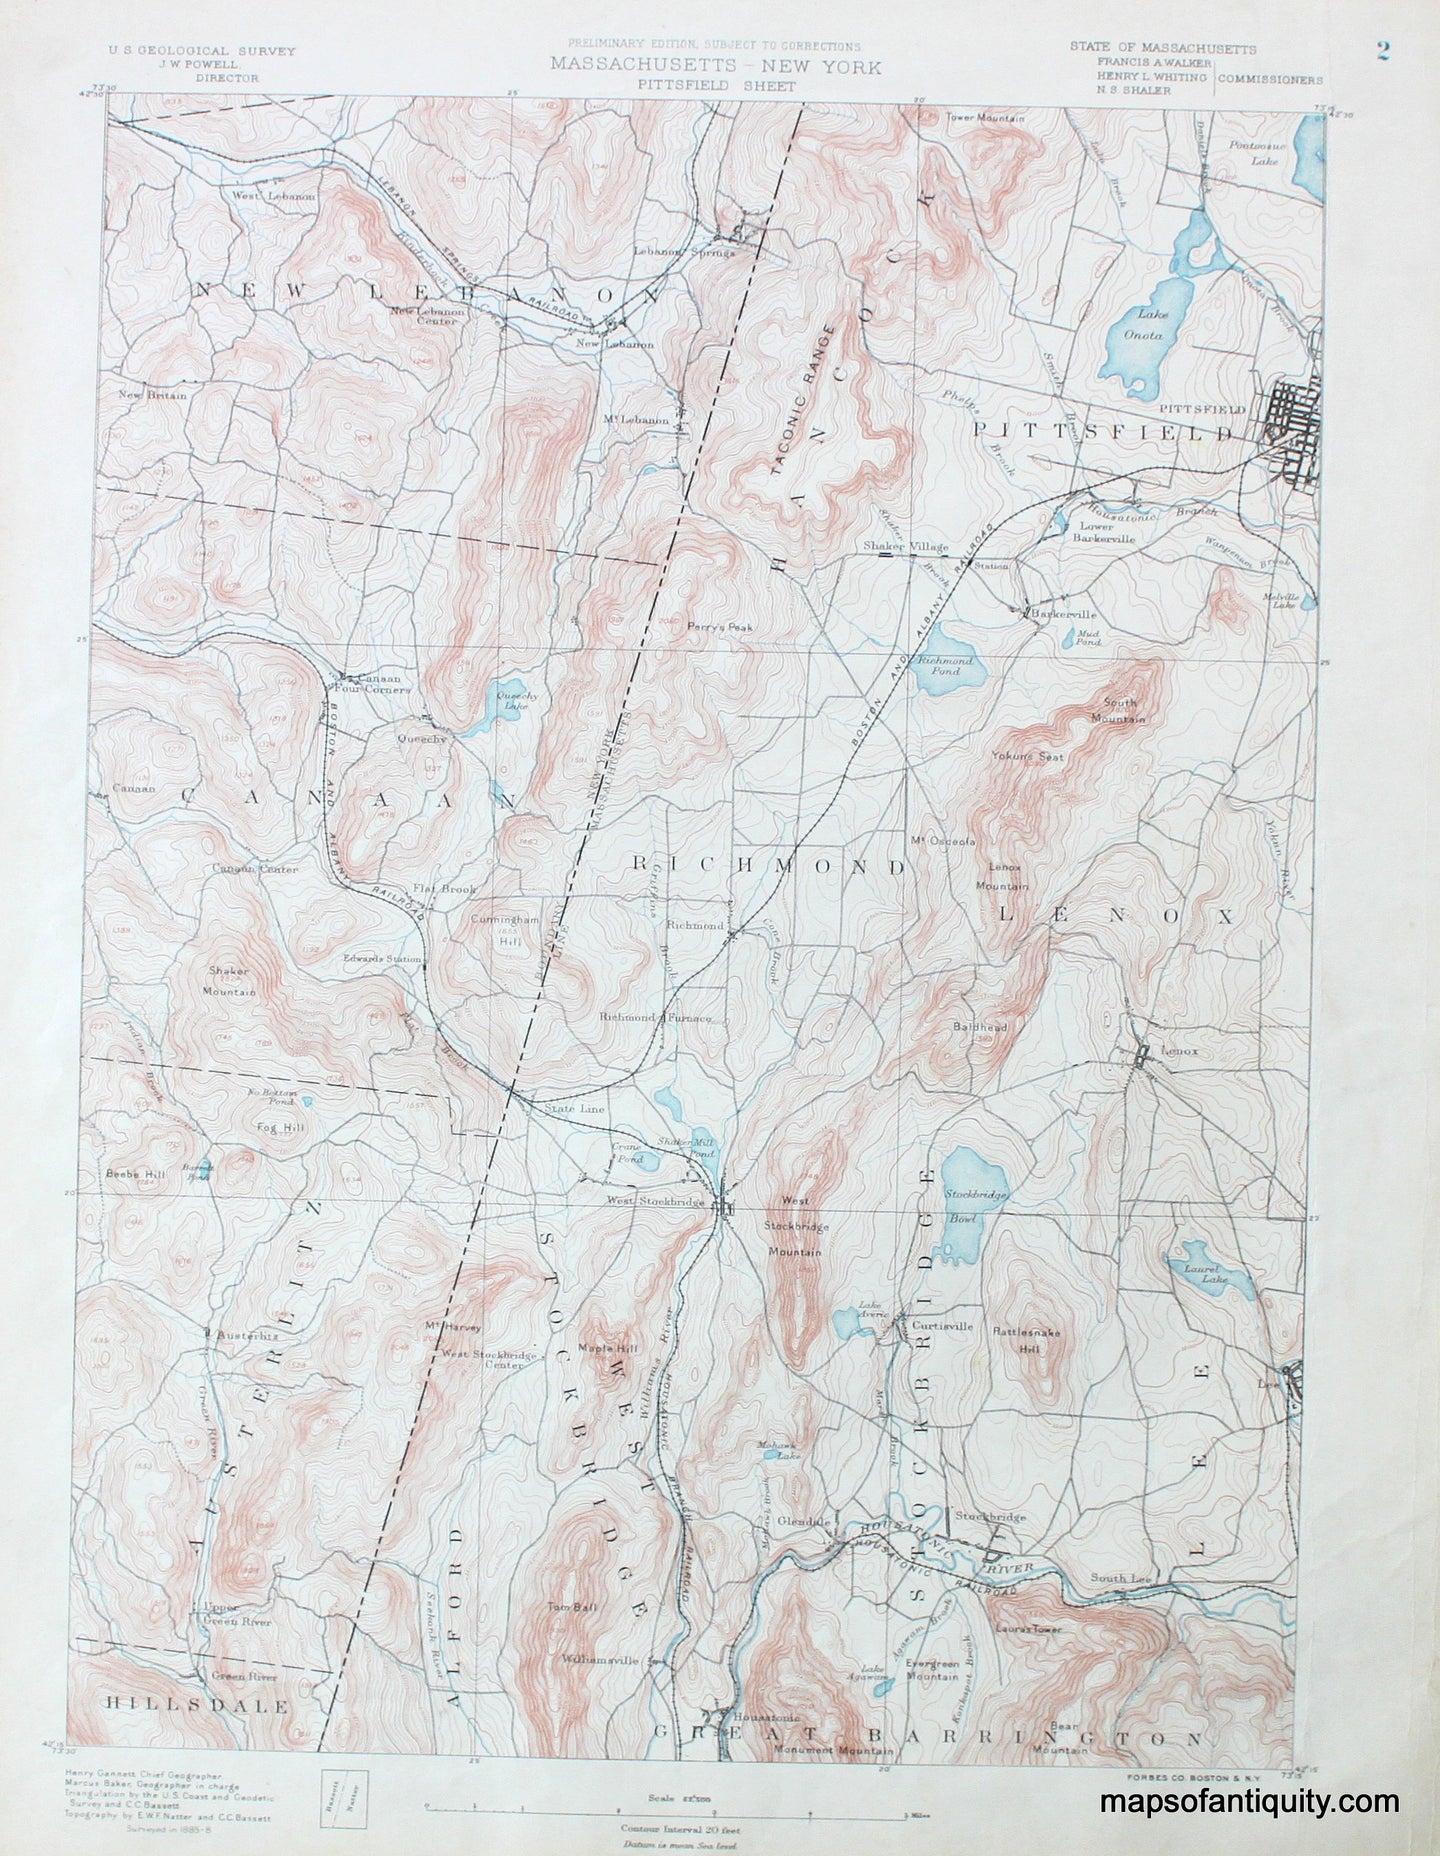 Topographical-Map-Pittsfield-MA-sheet-antique-topo-map-United-States-Massachusetts-General-1890-USGS-Maps-Of-Antiquity